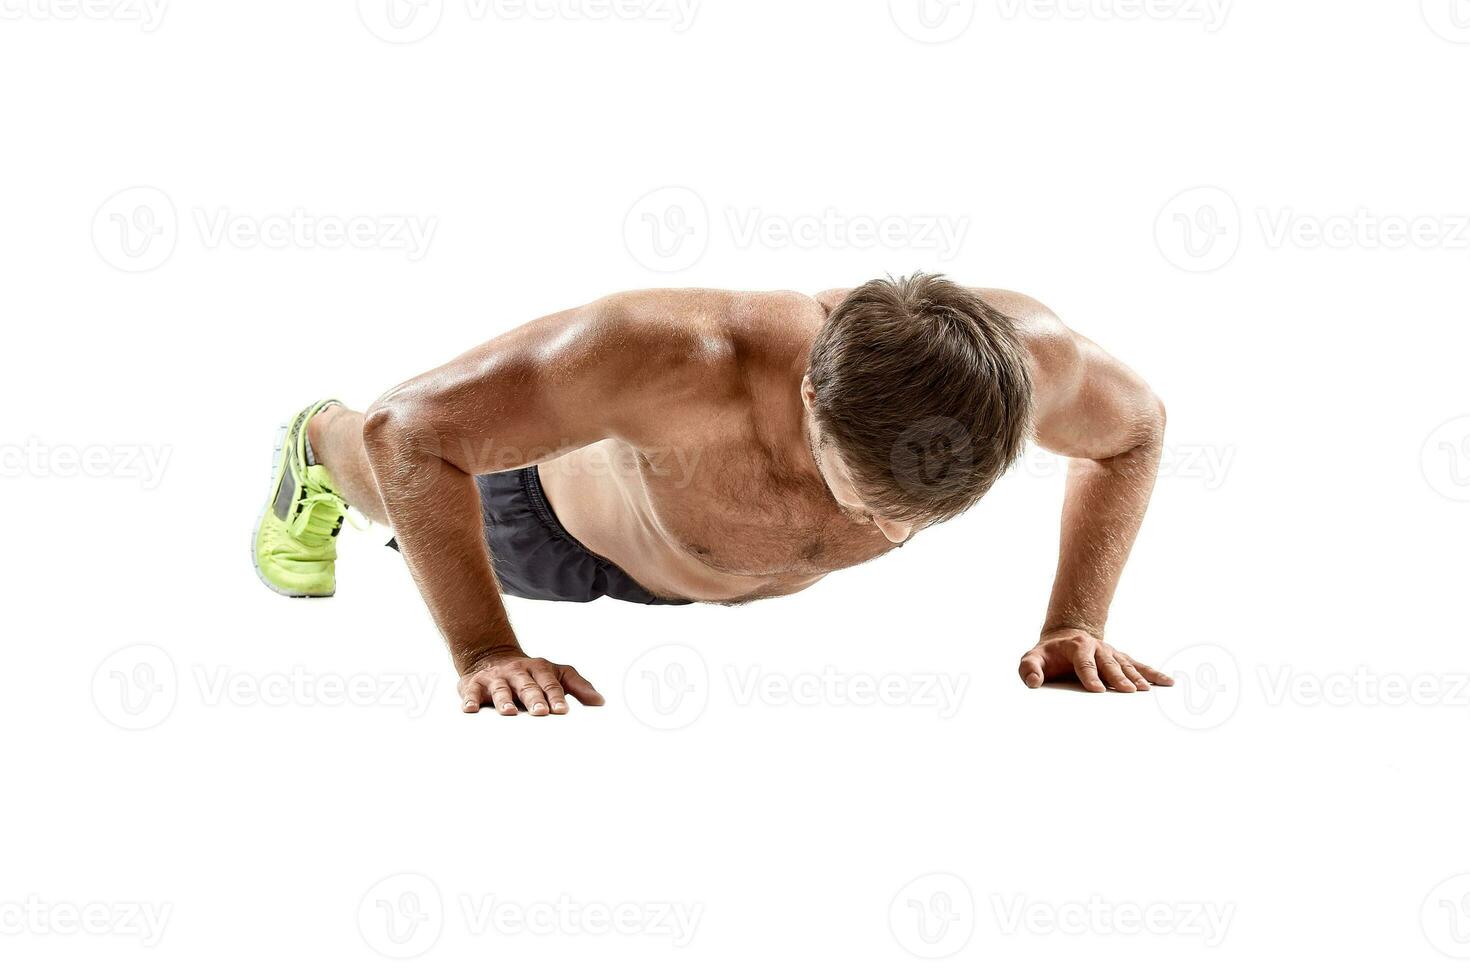 Push up fitness man doing push-up bodyweight exercise on gym floor. Athlete working out chest muscles strength training indoors photo